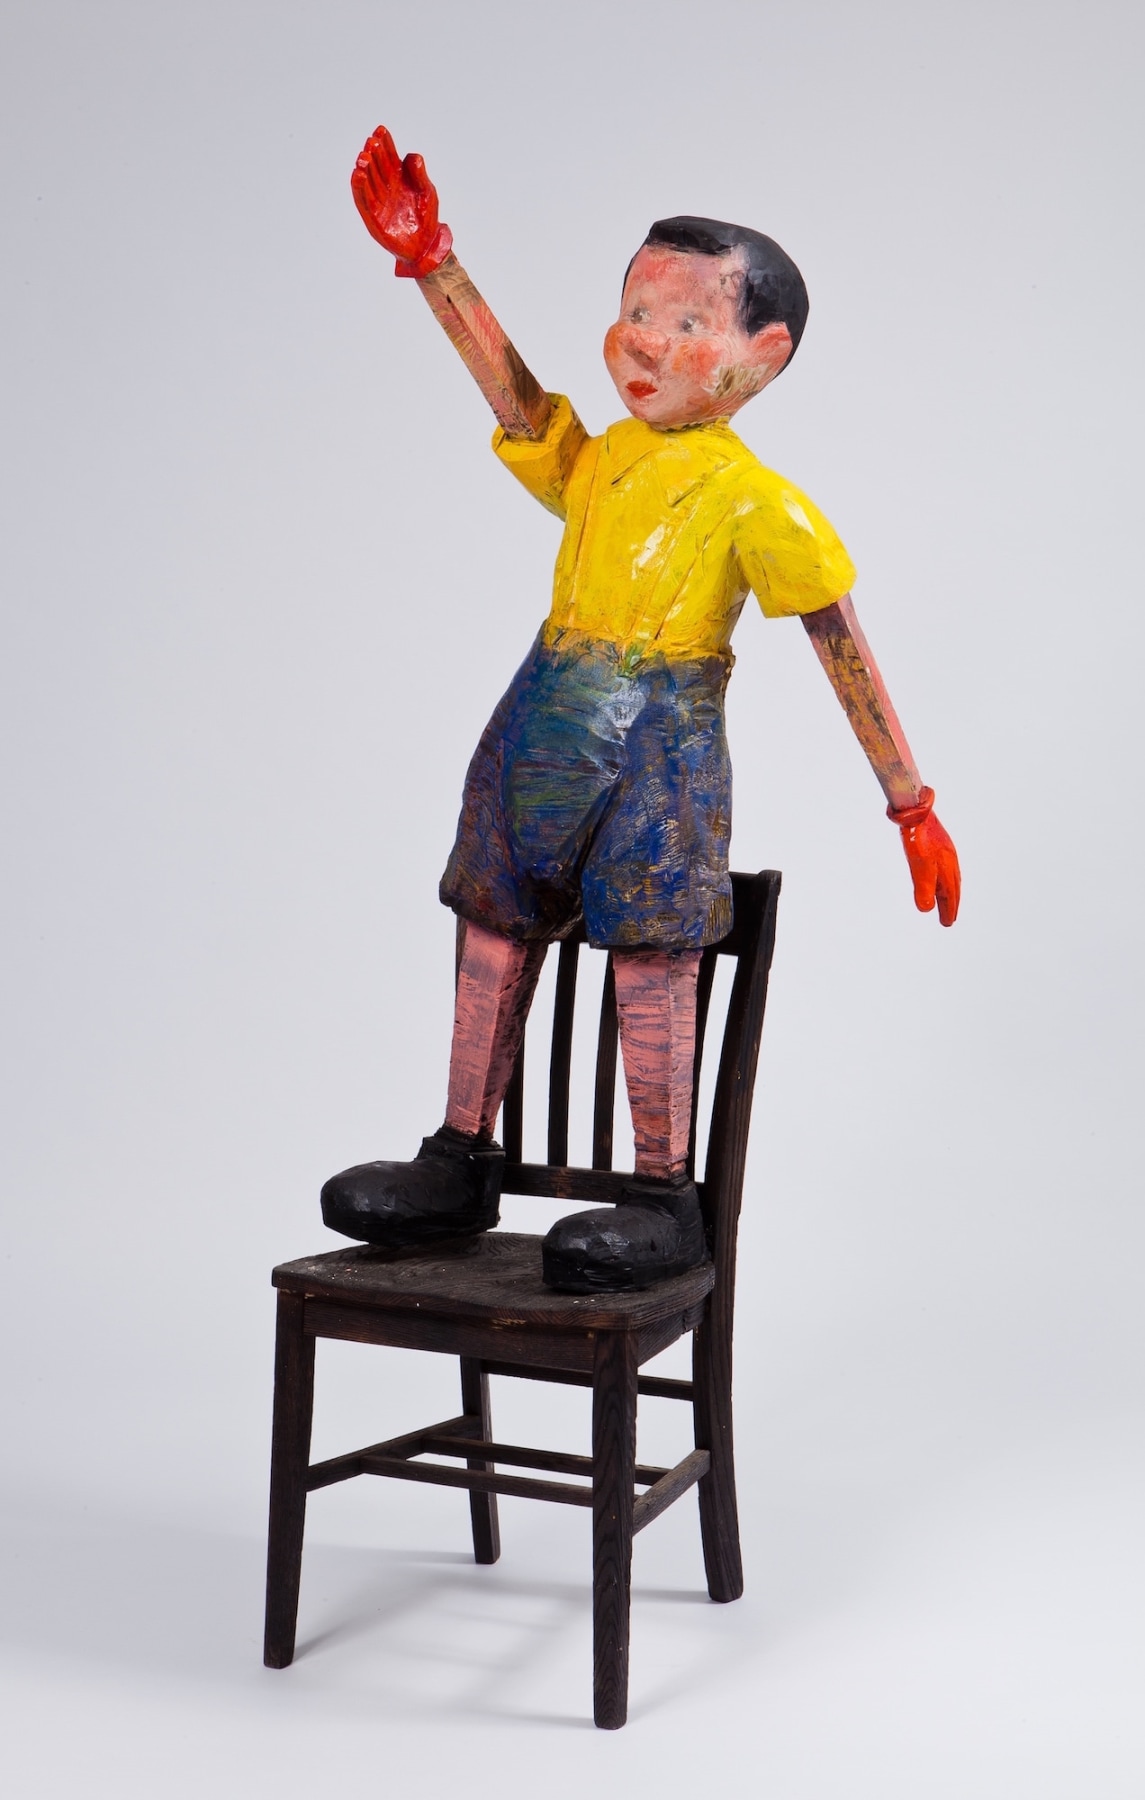 Red Gloves, Yellow Shirt, 2013, Oil enamel and stain on wood